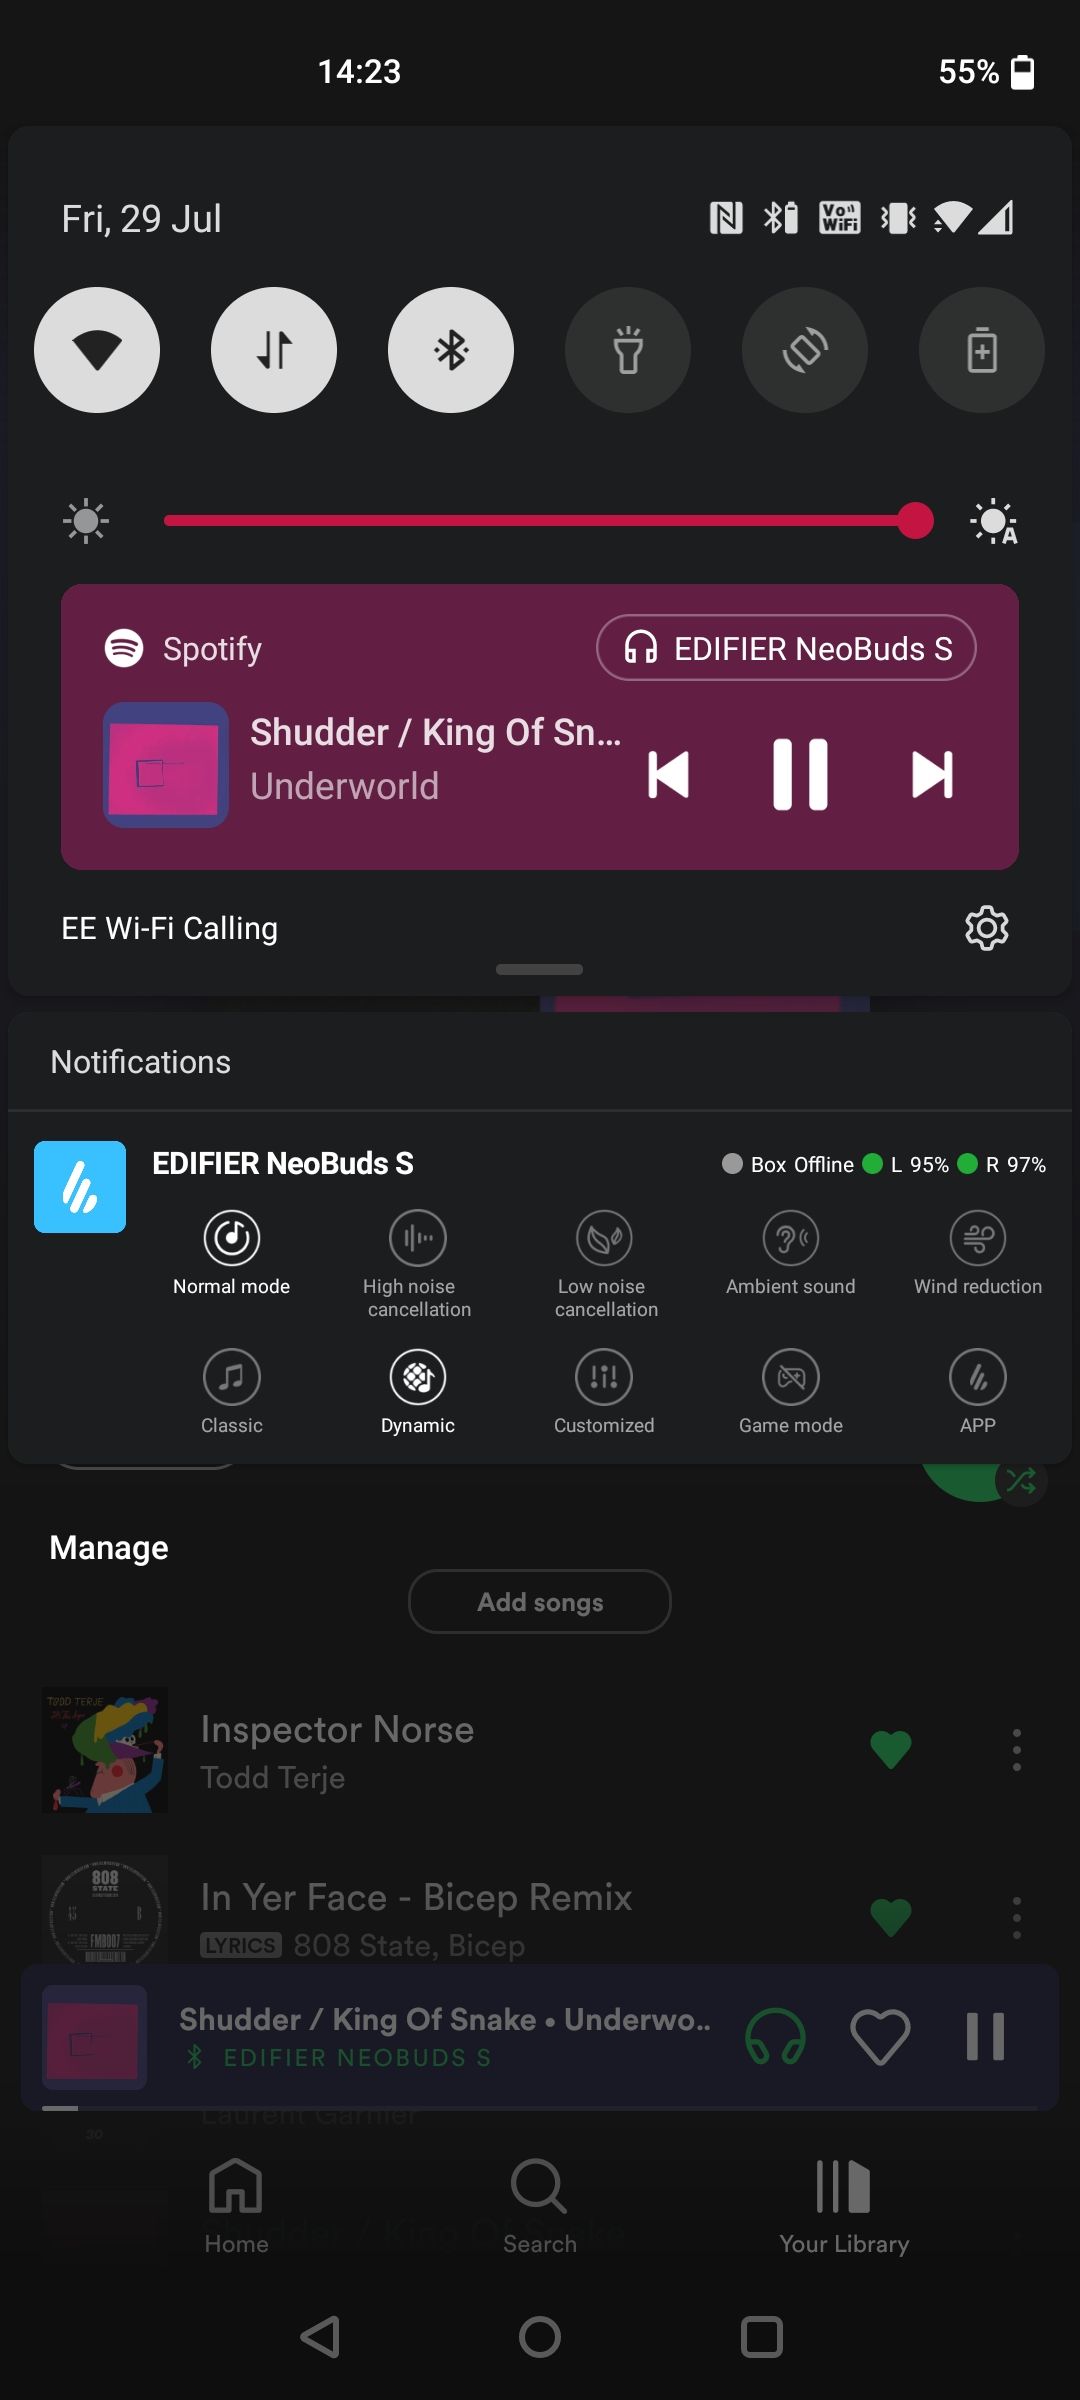 edifier neobuds s connect app notification bar quick options